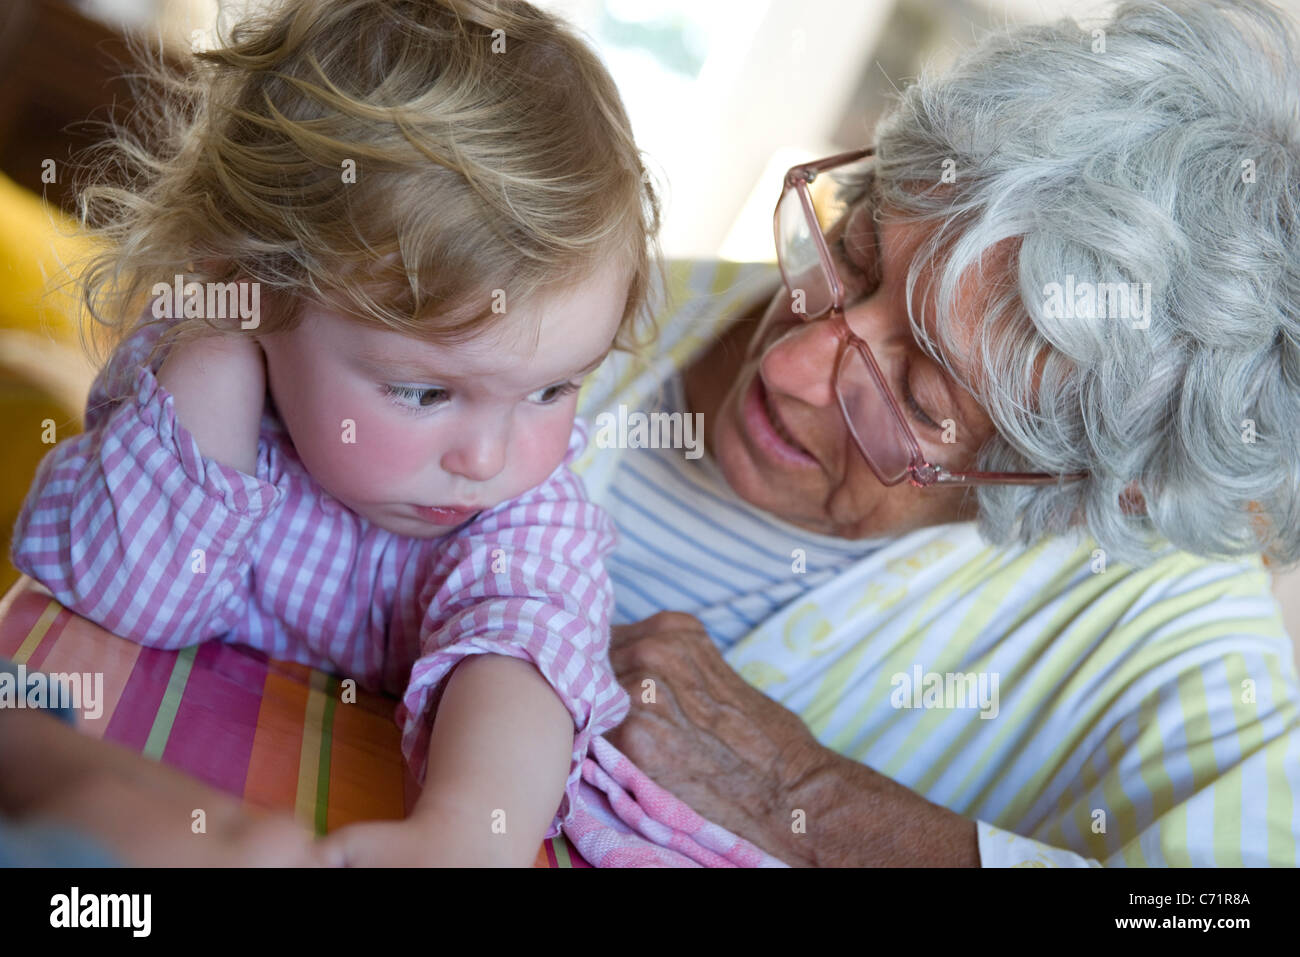 Sulky Toddler Stock Photos & Sulky Toddler Stock Images - Alamy